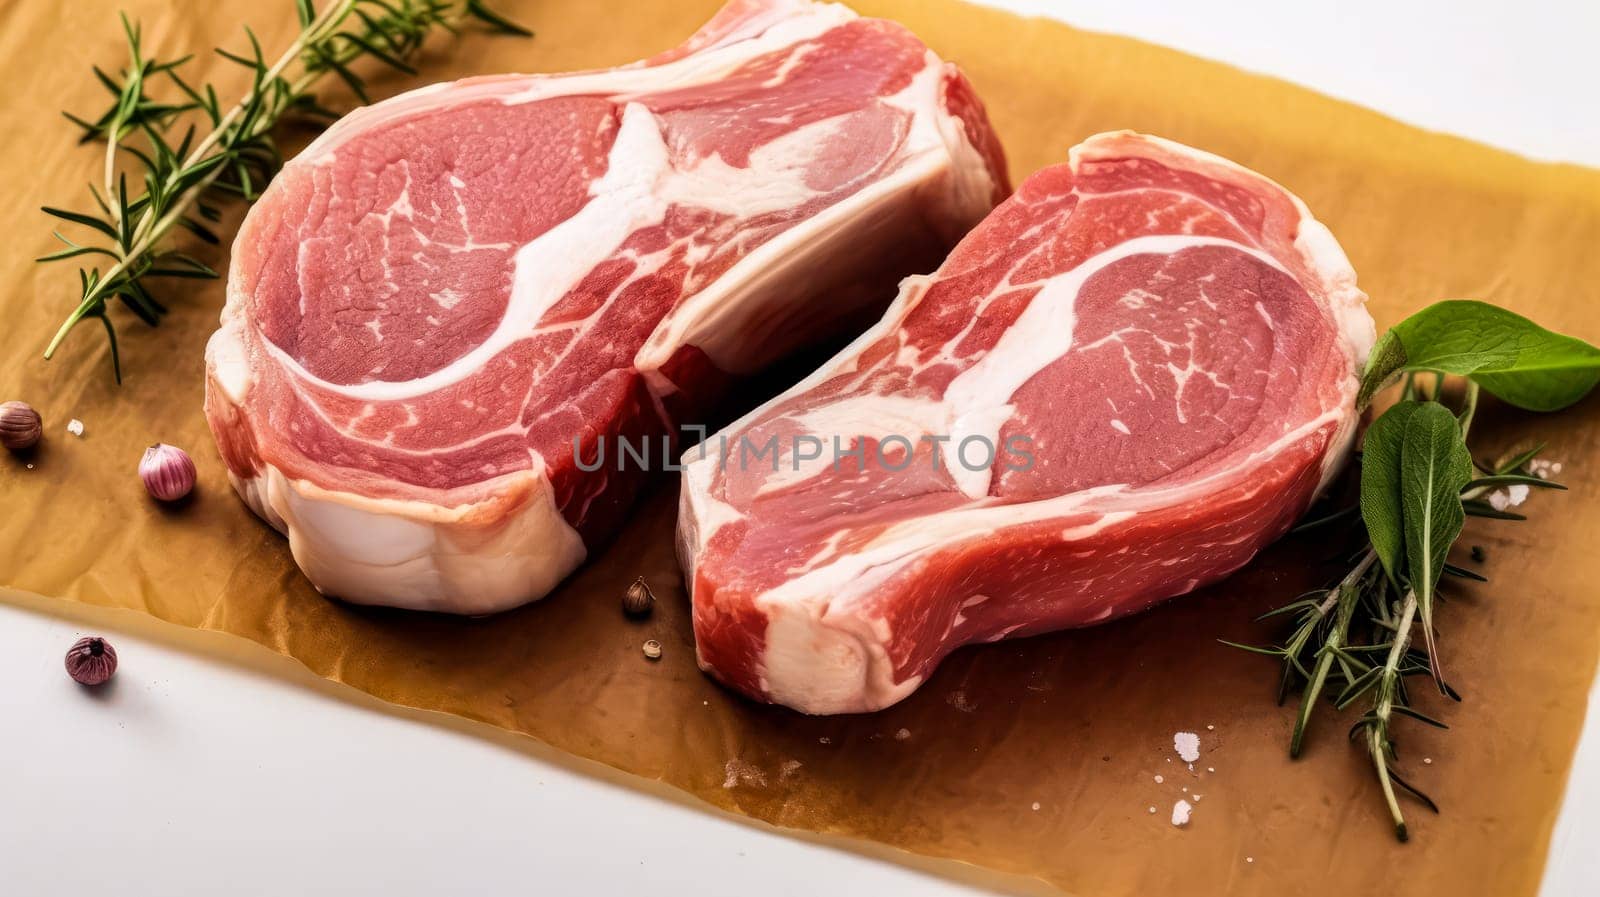 Hearty indulgence, Beef steak with bone, expertly captured on parchment, presented on a white isolated background. A culinary delight in every detail.